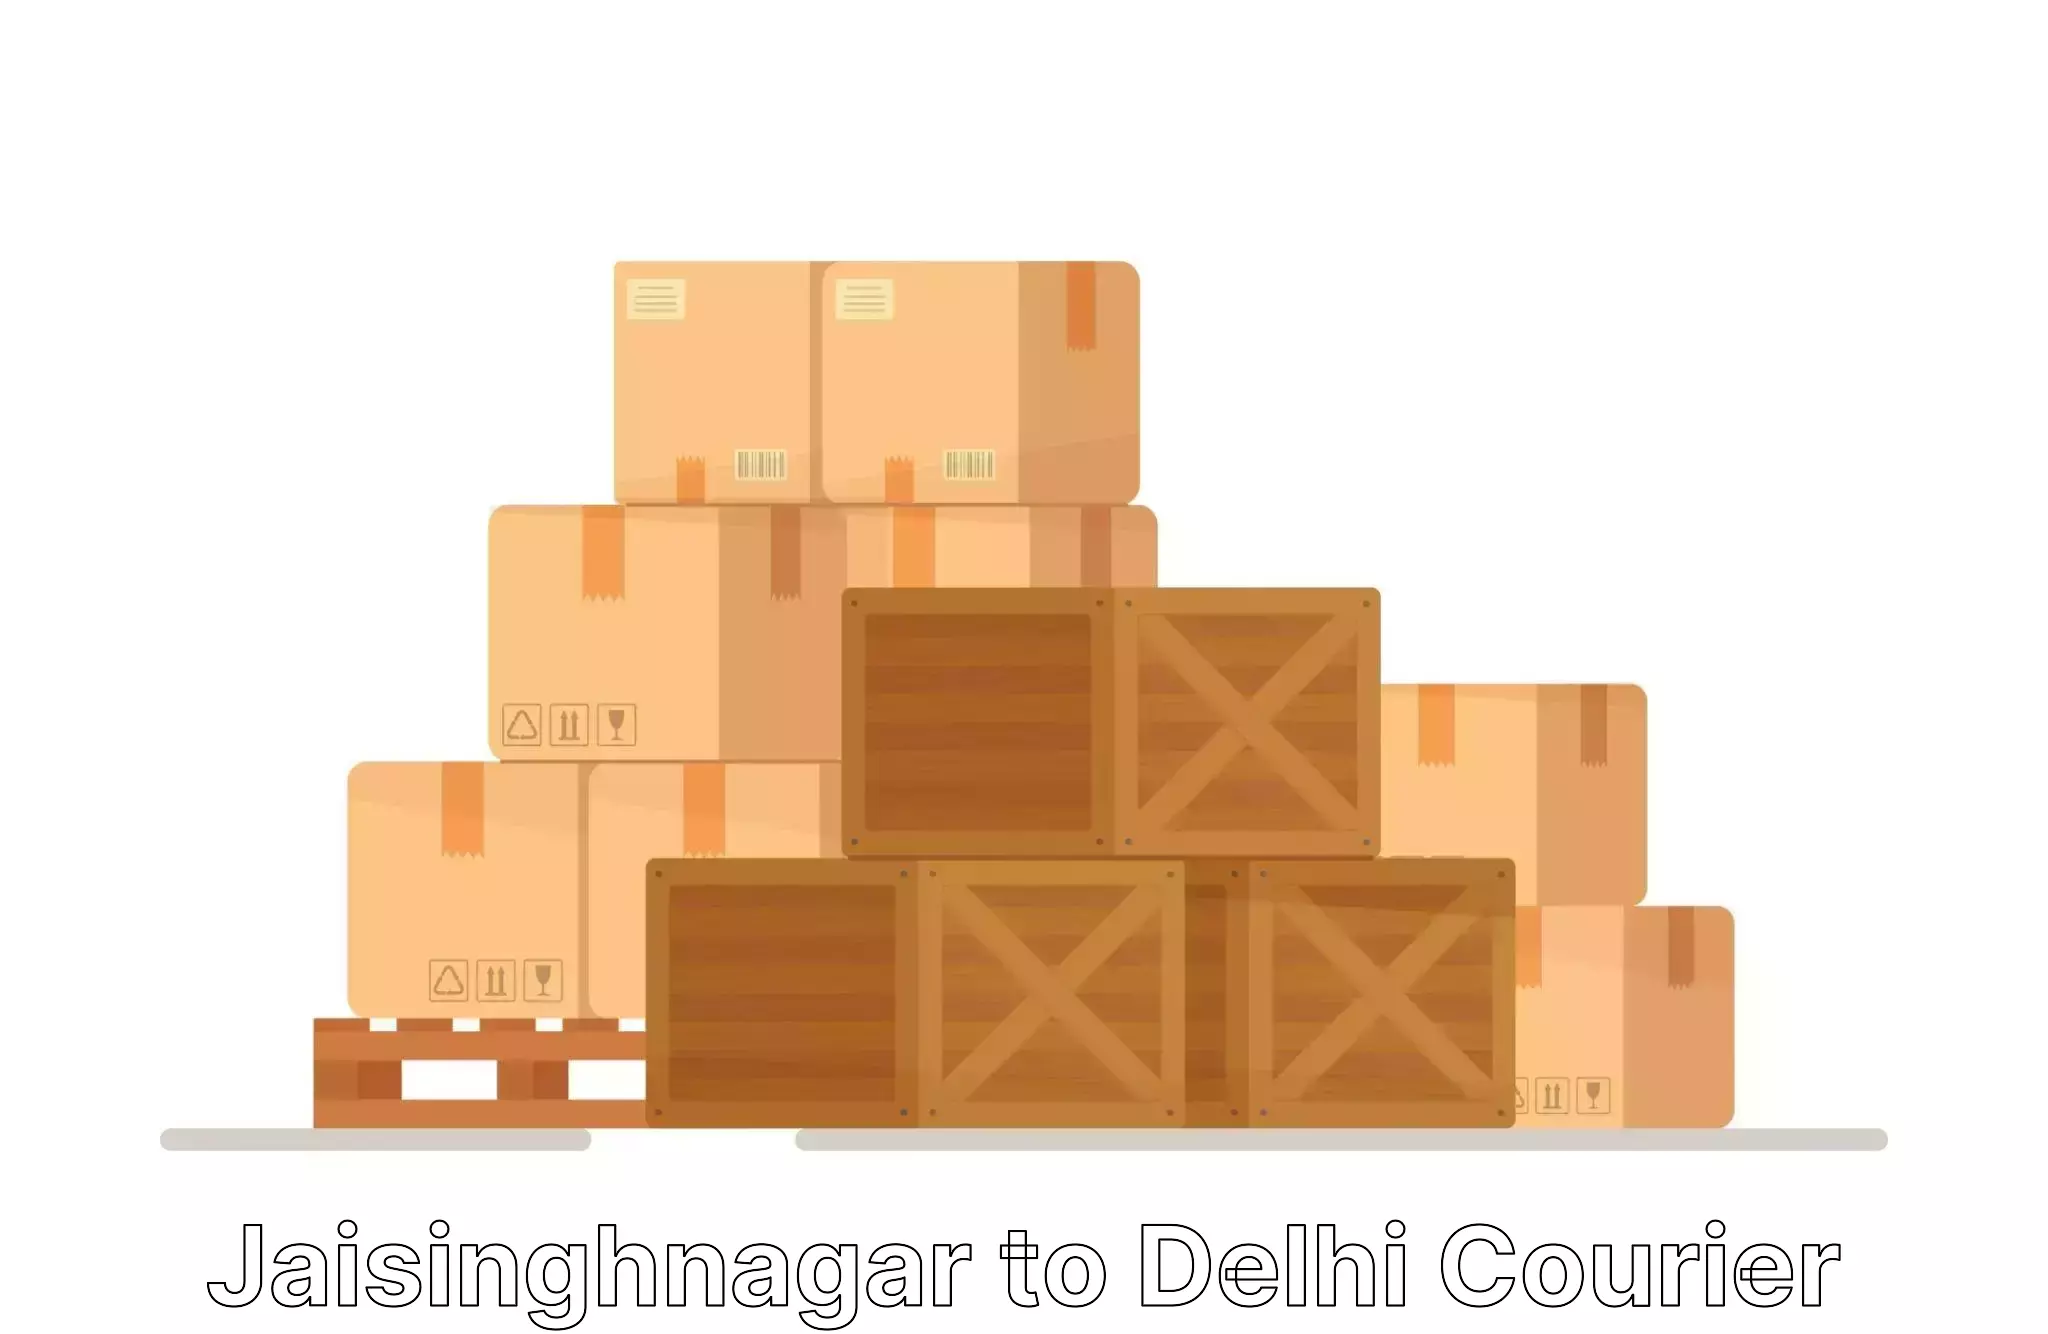 Moving and handling services in Jaisinghnagar to IIT Delhi